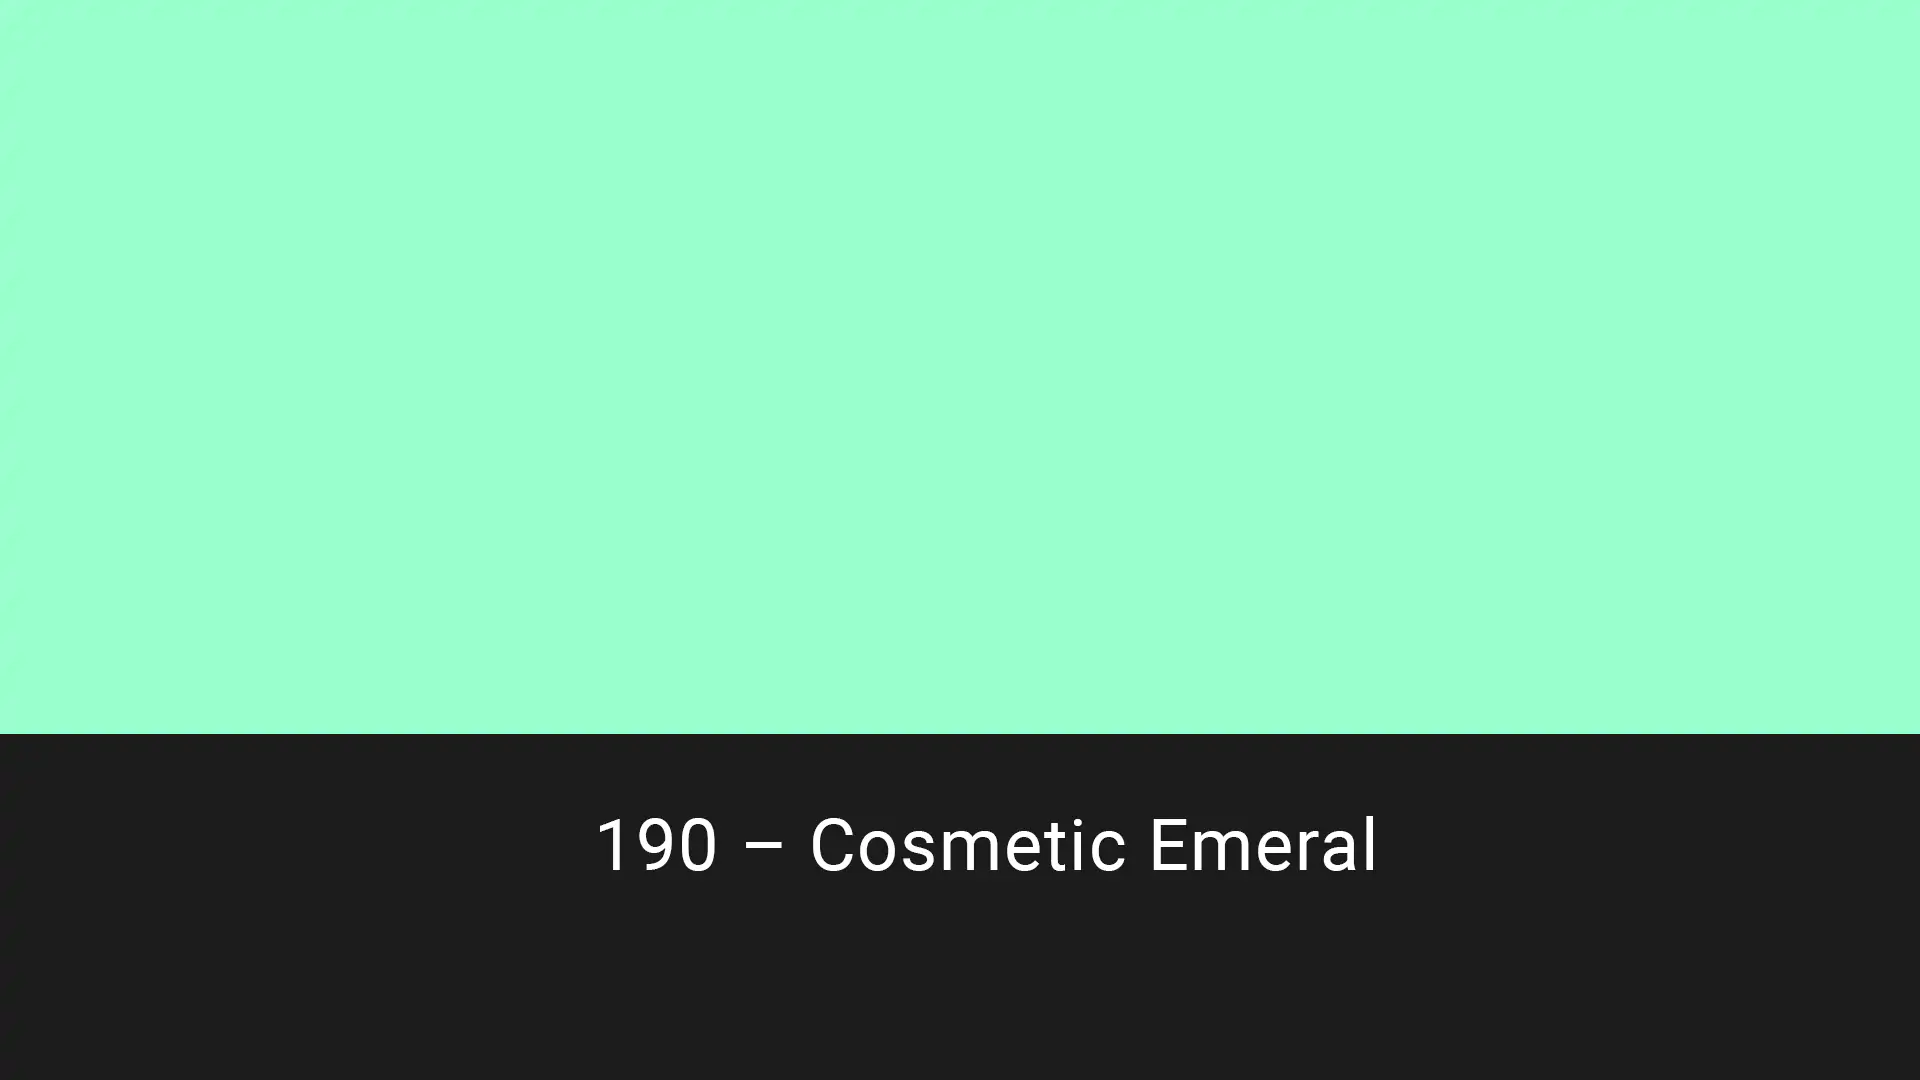 Cotech filters 190 Cosmetic Emerald